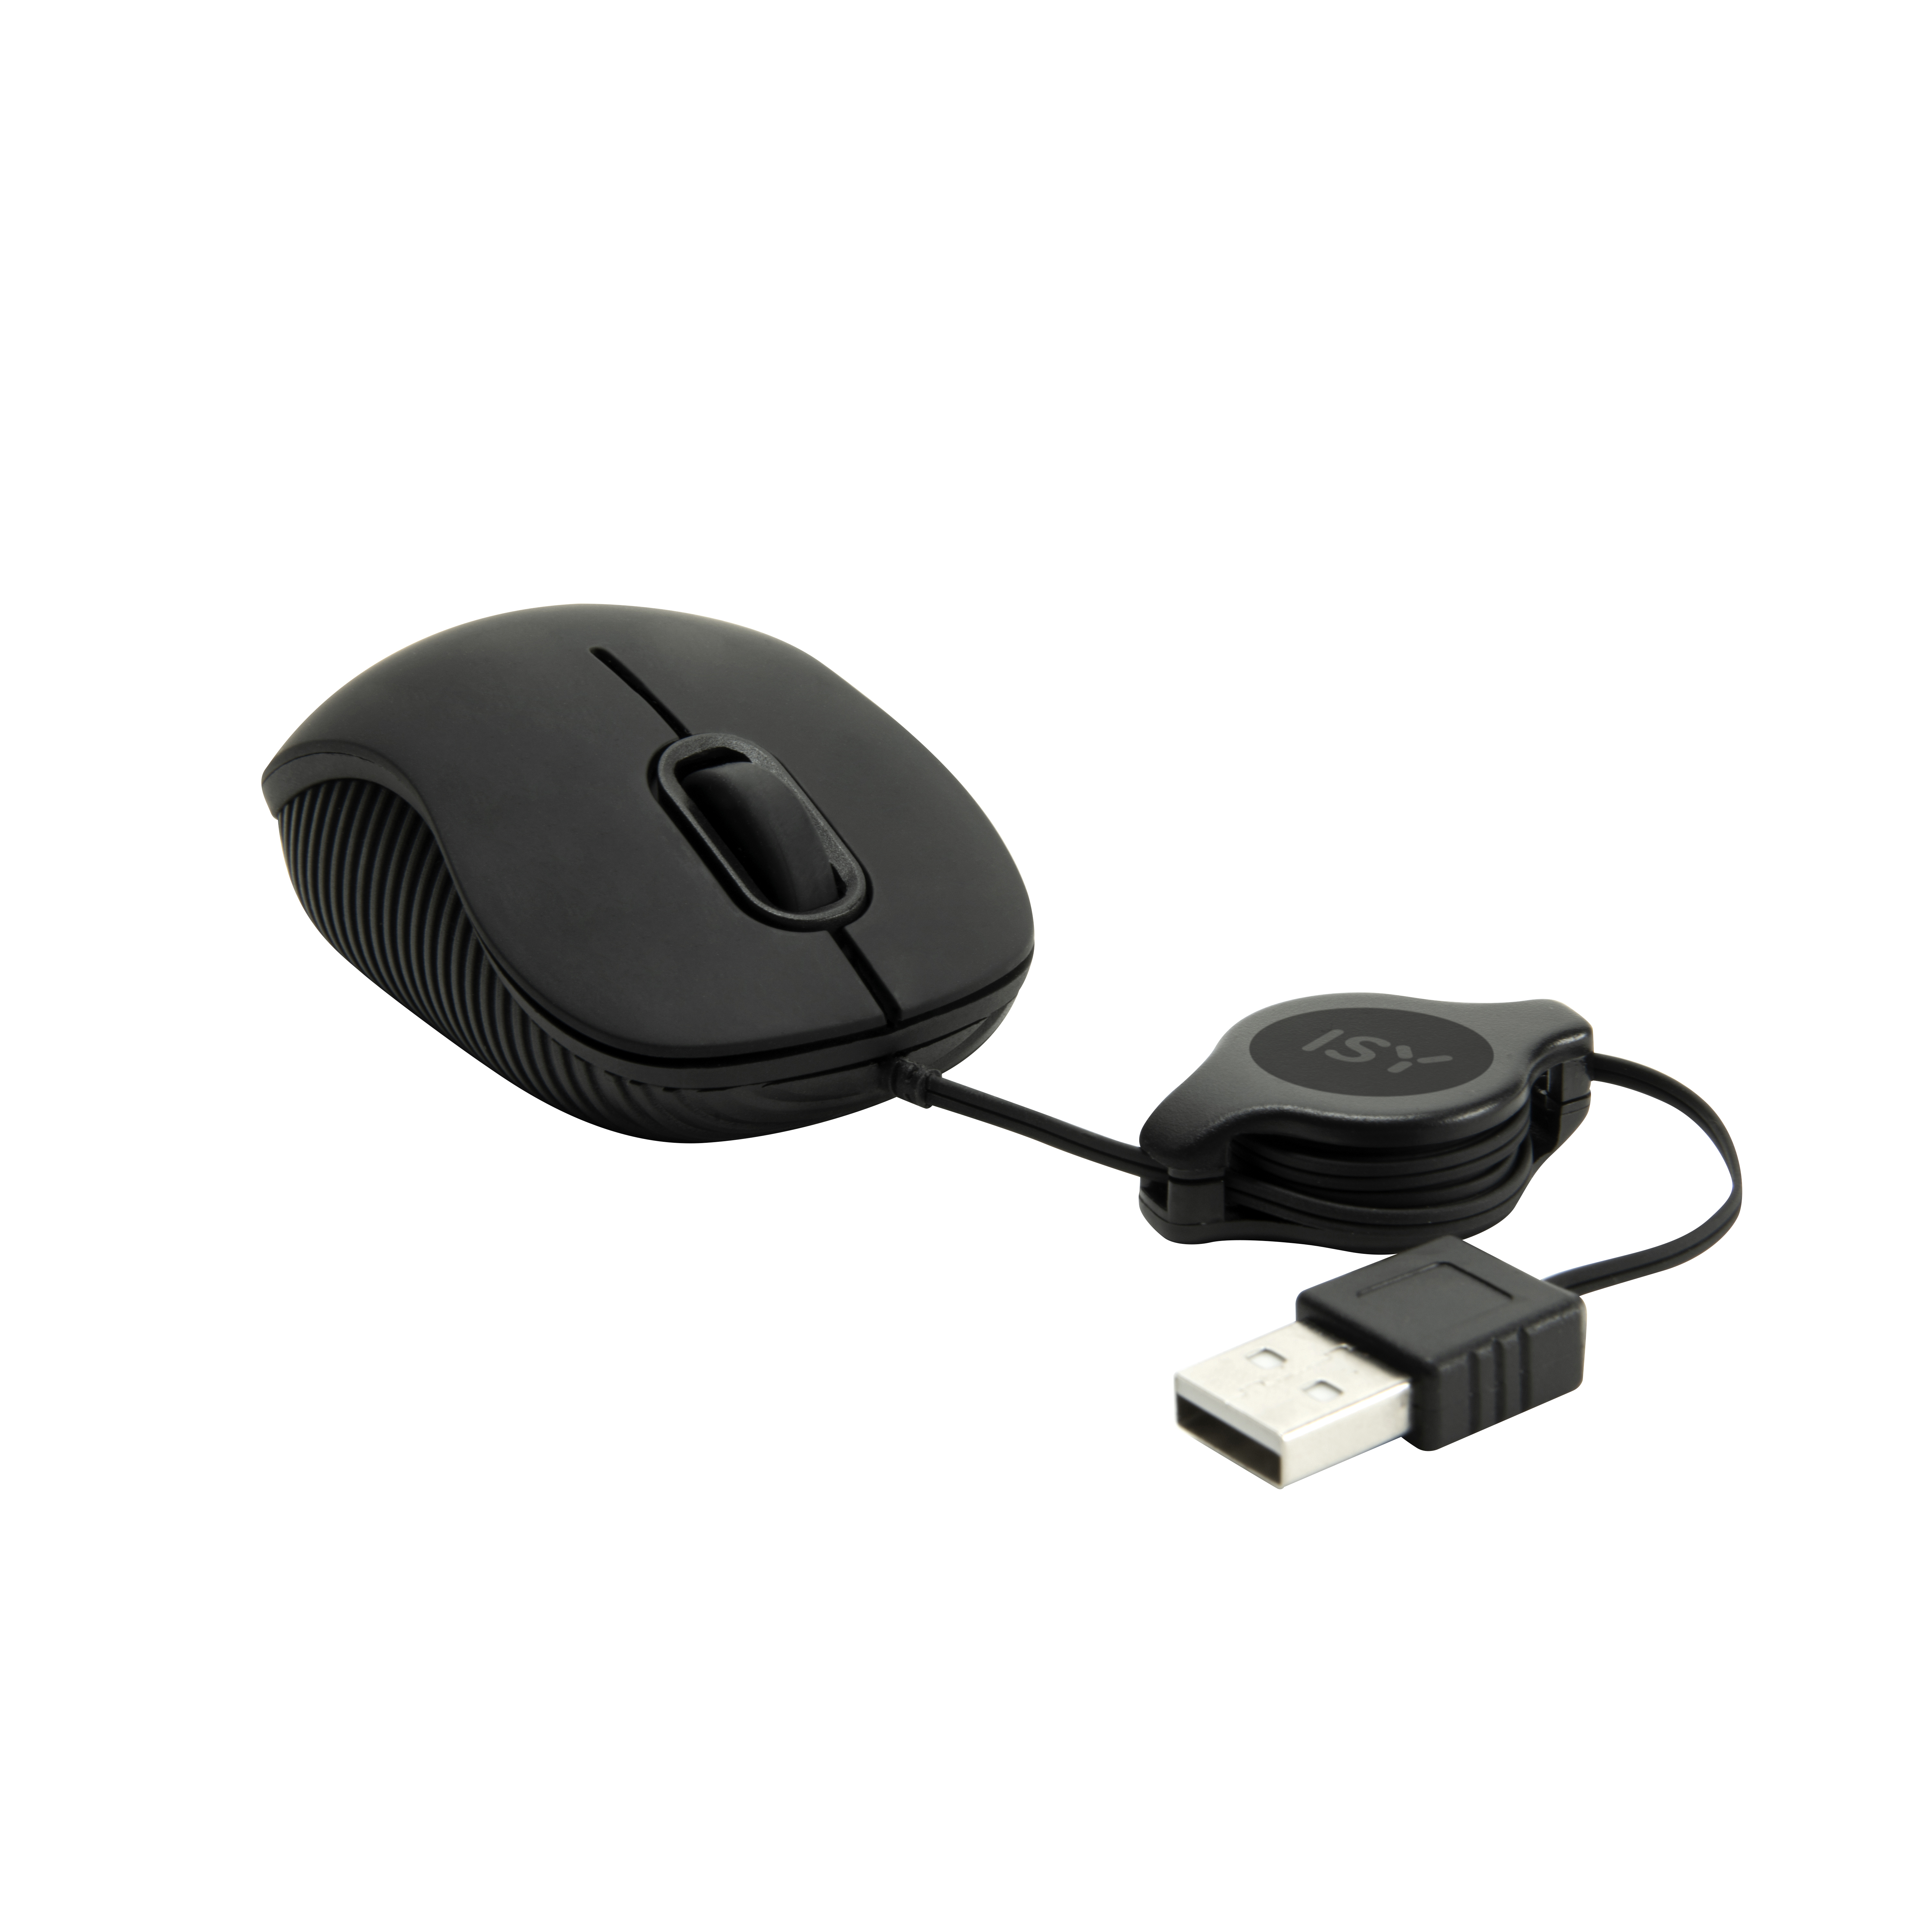 IMM-1000 Mouse Schwarz Computermaus, Mobile ISY Optical Silent